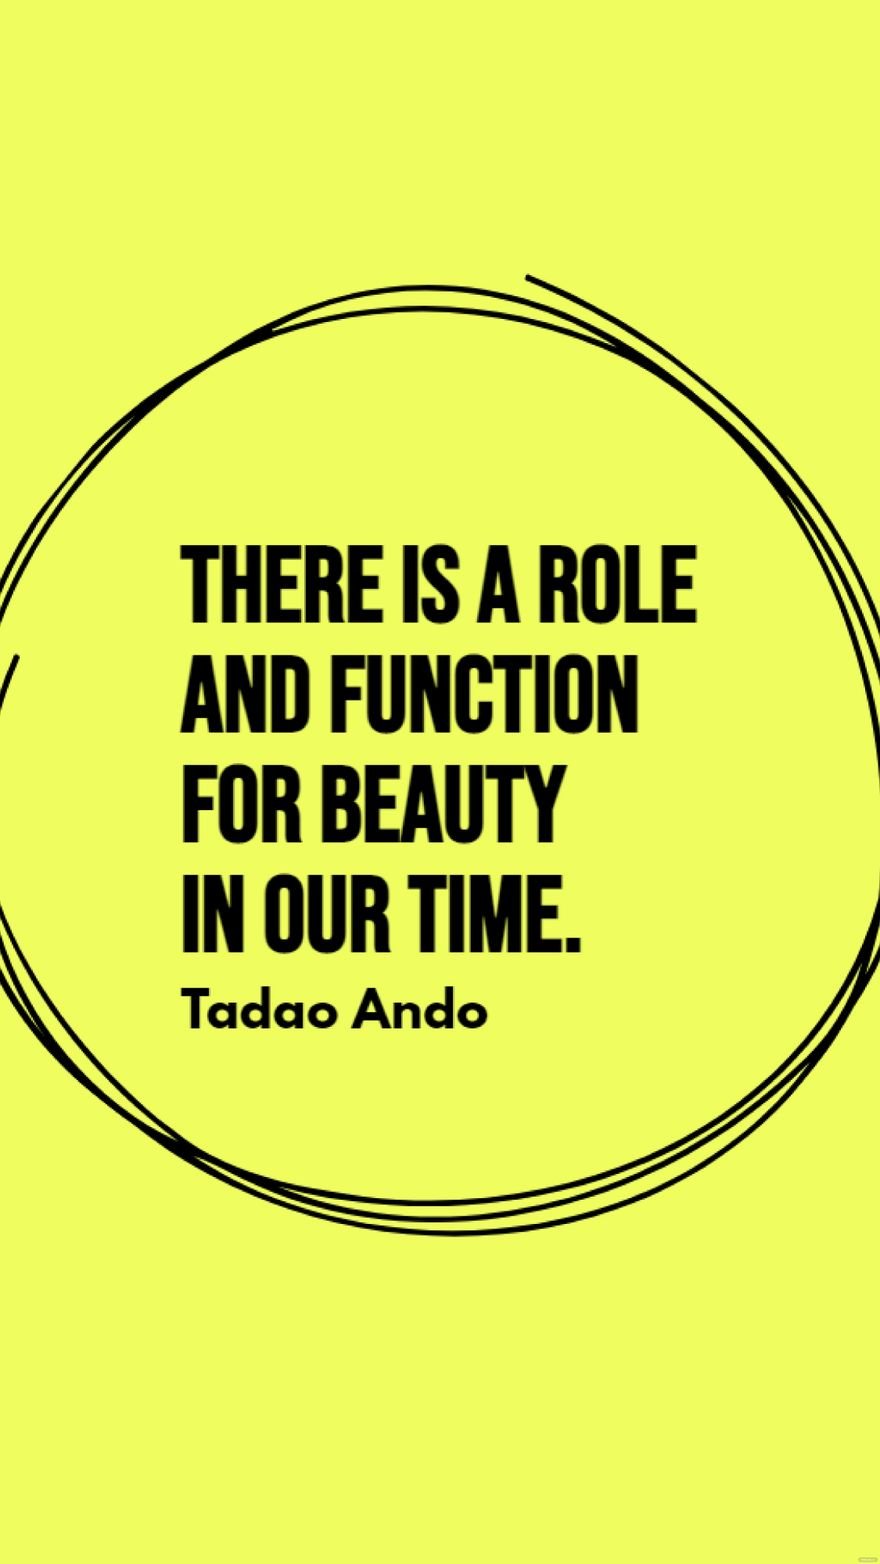 Tadao Ando - There is a role and function for beauty in our time.